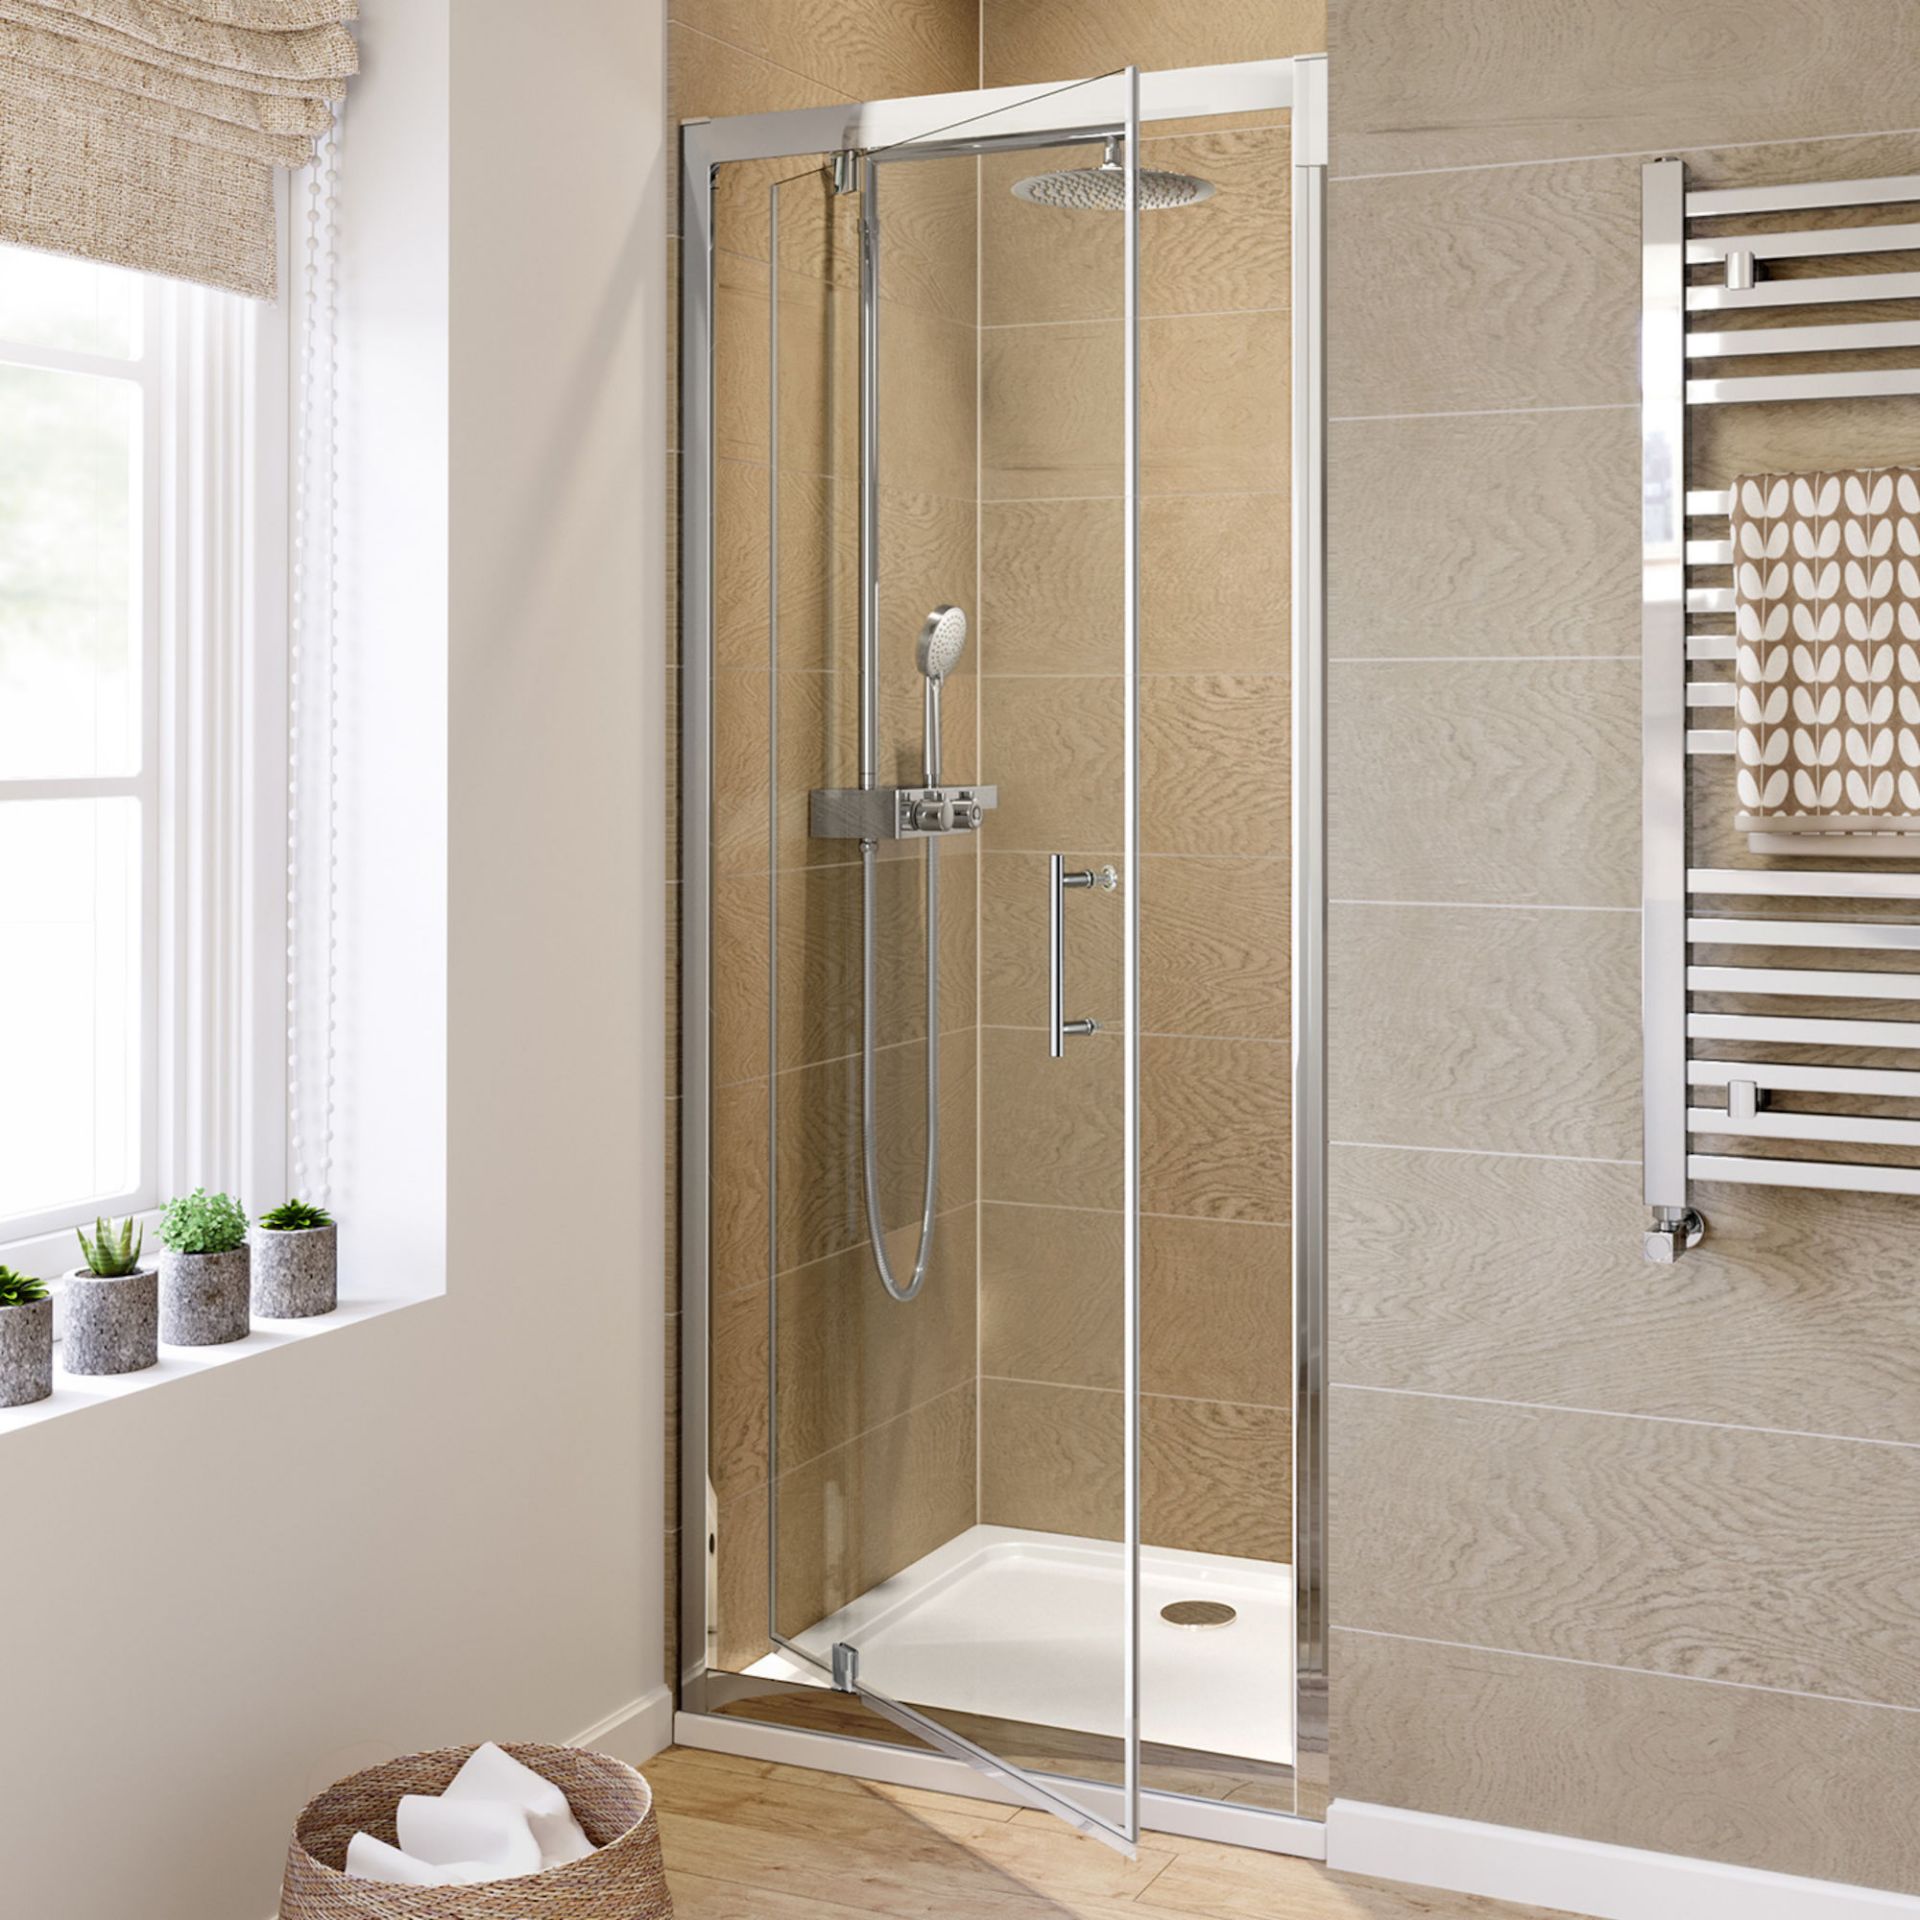 (CT170) 900mm - 6mm - Elements Pivot Shower Door. RRP £299.99. 6mm Safety Glass Fully waterproof